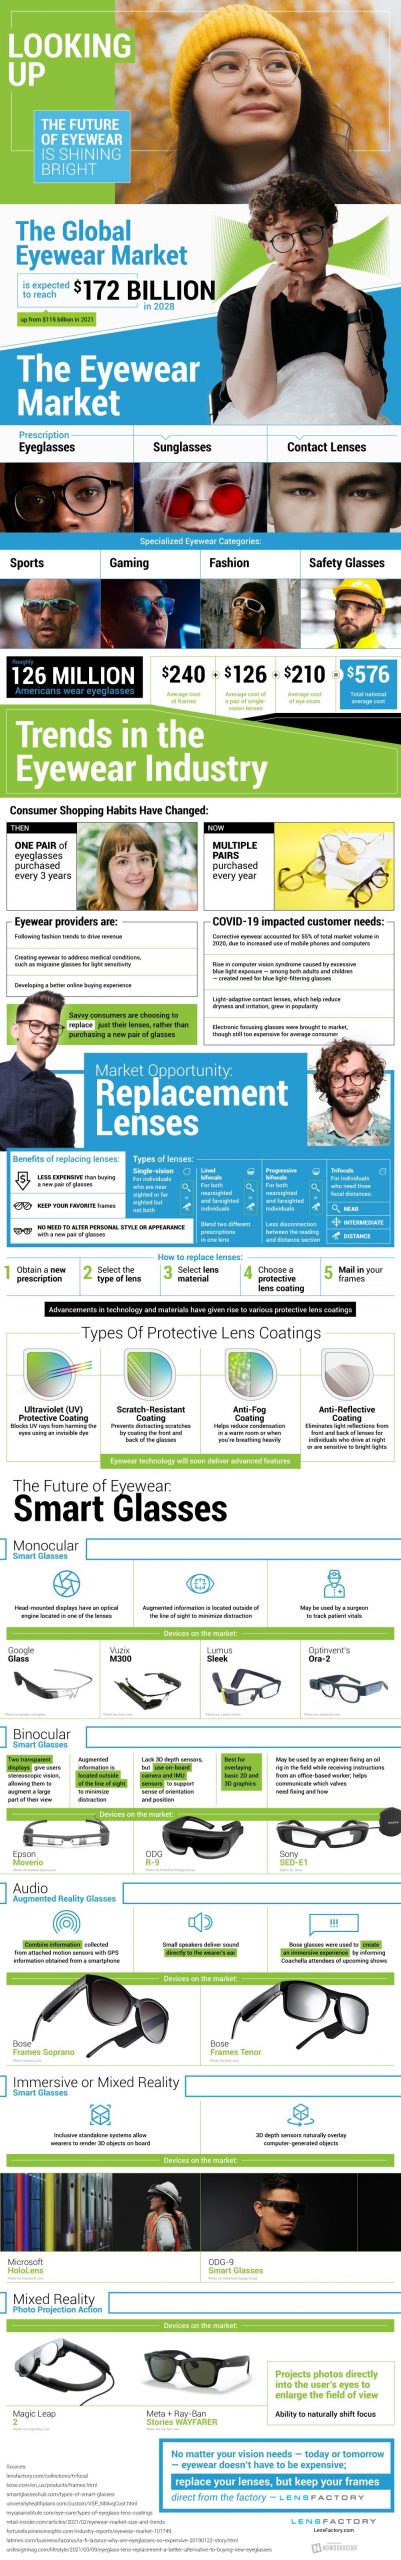 The Future Tech of Smart Glasses [Infographic] | DeviceDaily.com